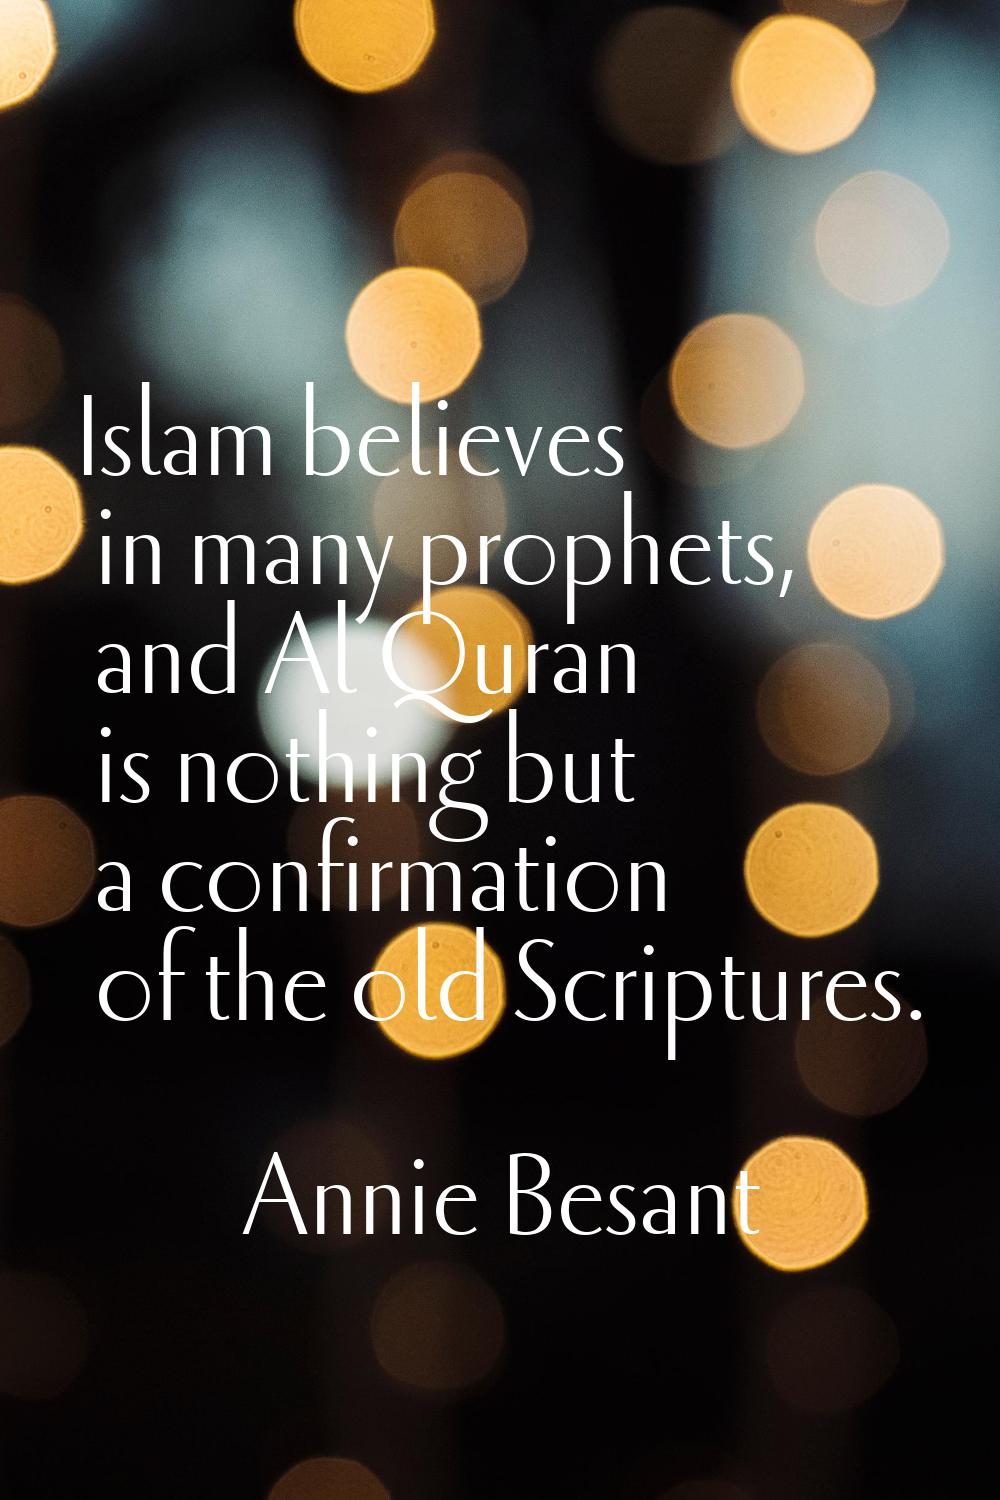 Islam believes in many prophets, and Al Quran is nothing but a confirmation of the old Scriptures.